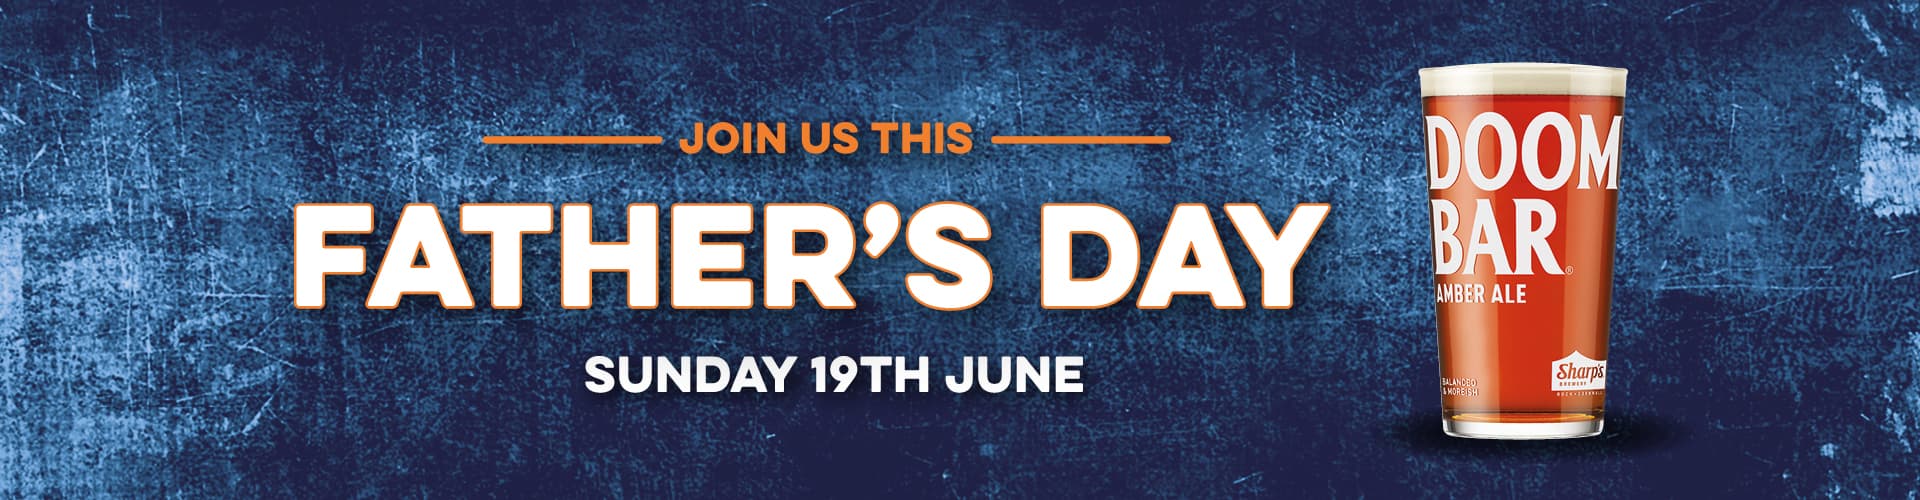 Father's Day at The Golden Fleece pub in York